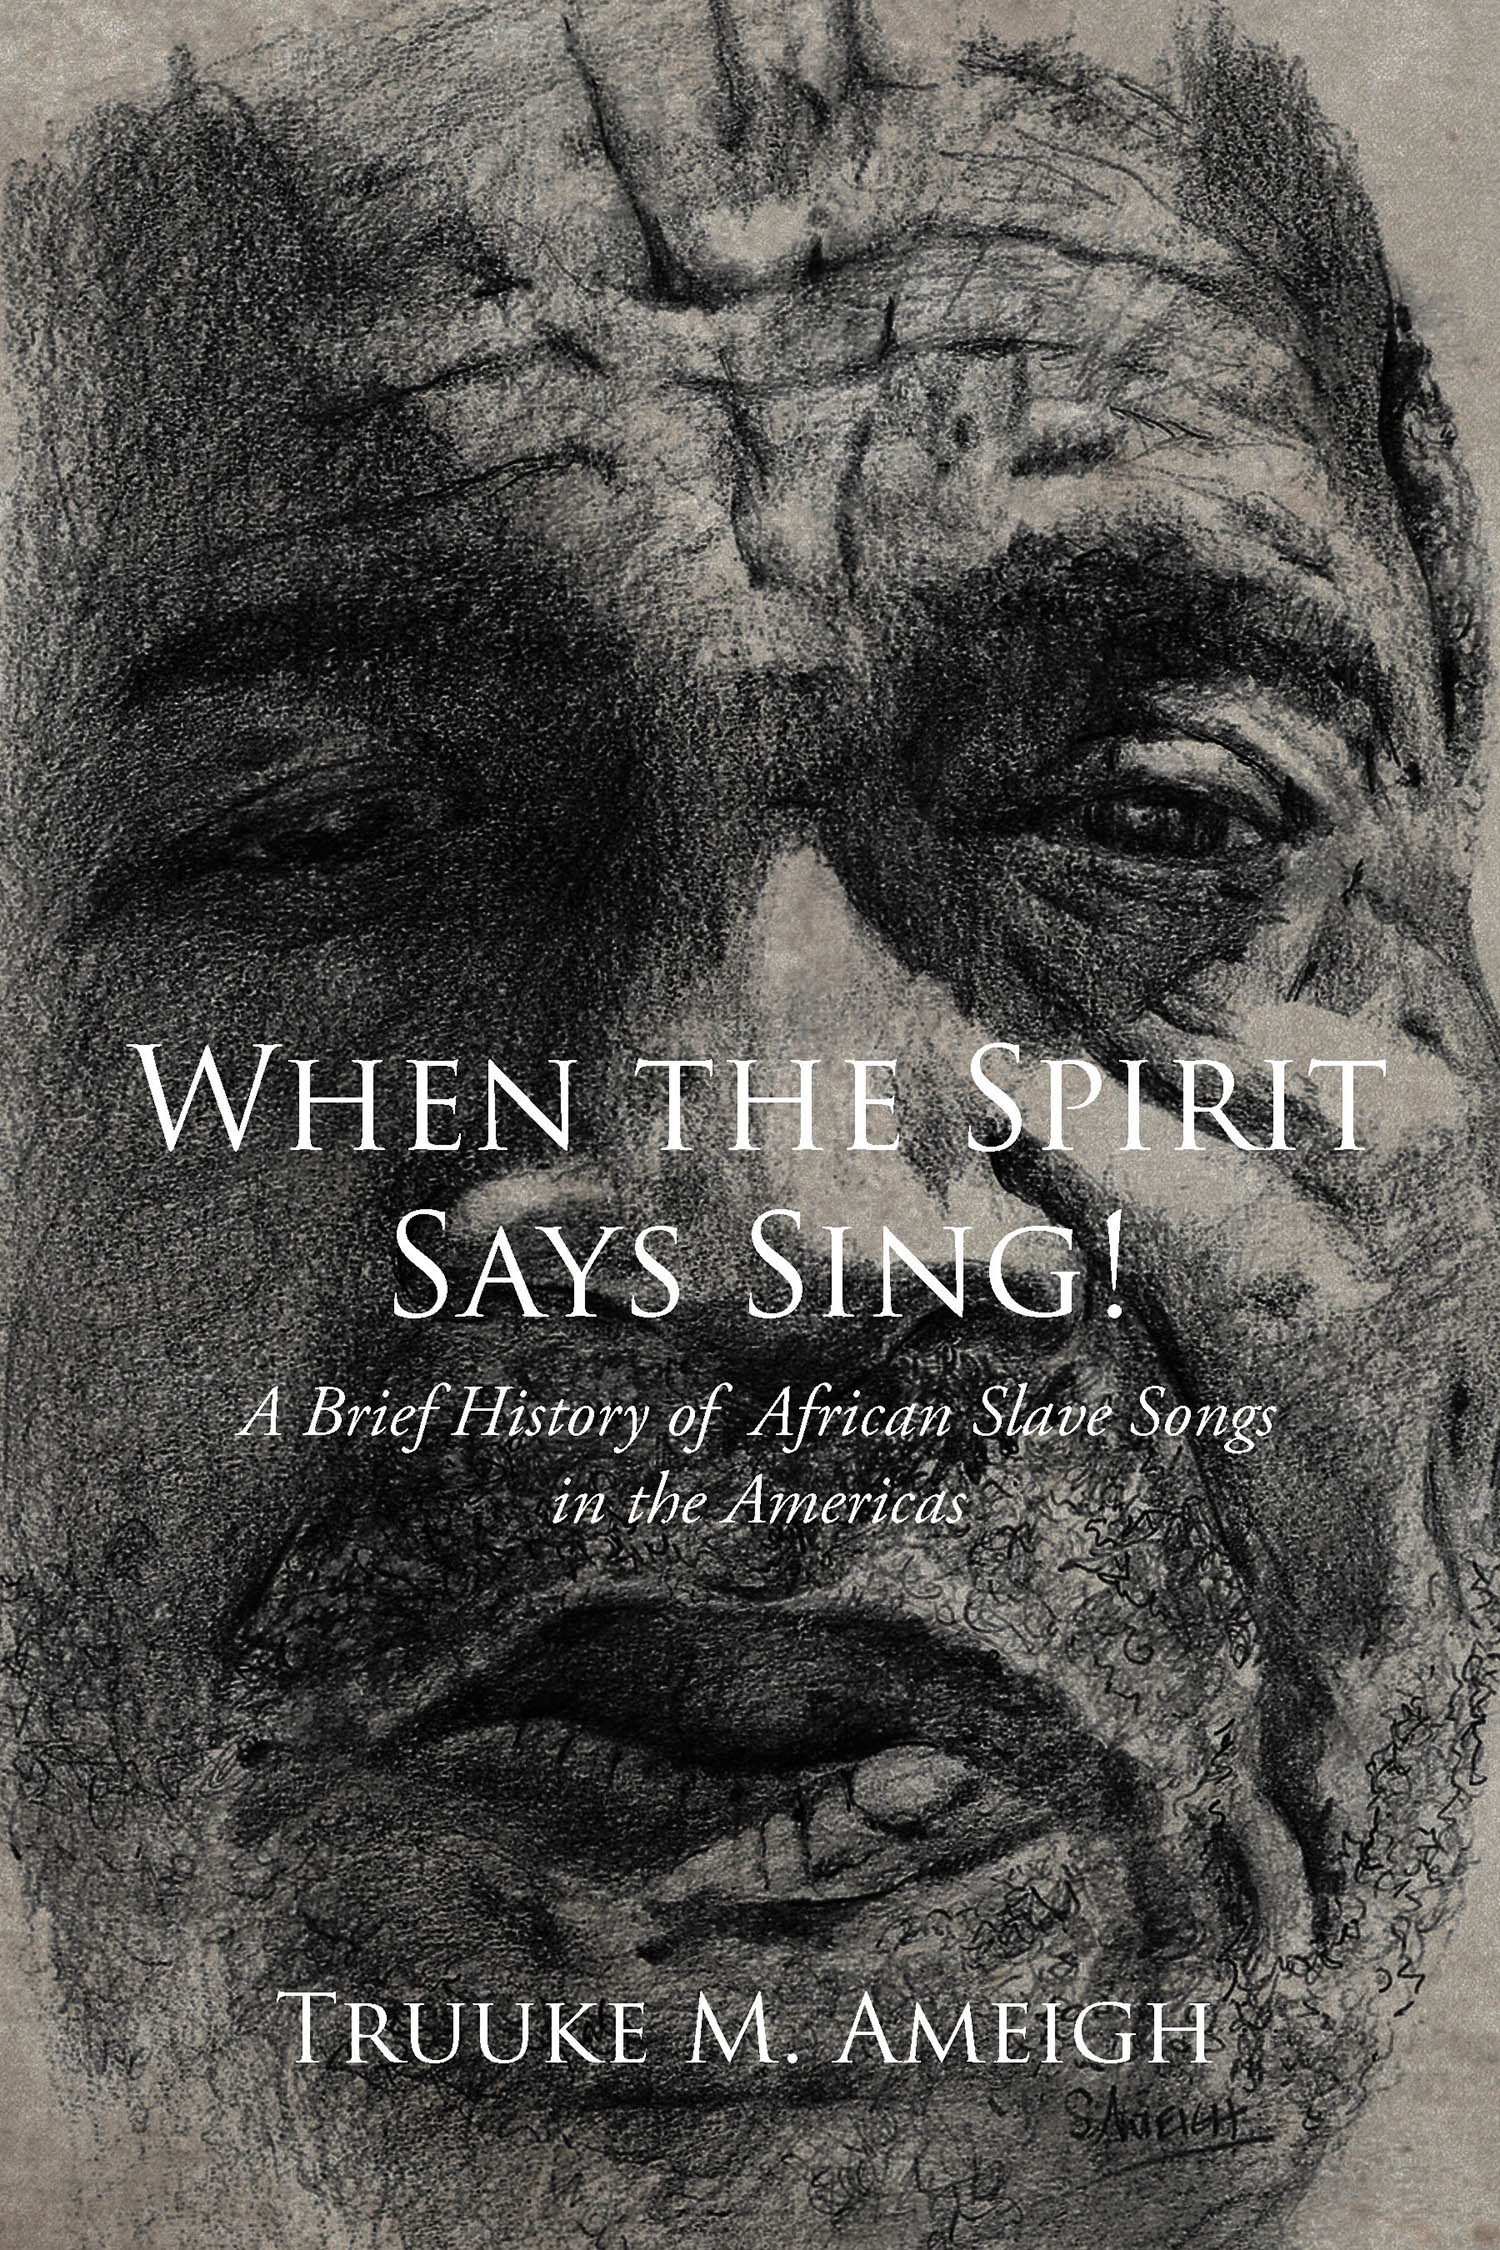 Author Truuke M. Ameigh’s New Book, "When the Spirit Says Sing!" Presents a Thorough and Compelling Look at the History of African Slave Songs Throughout the Americas